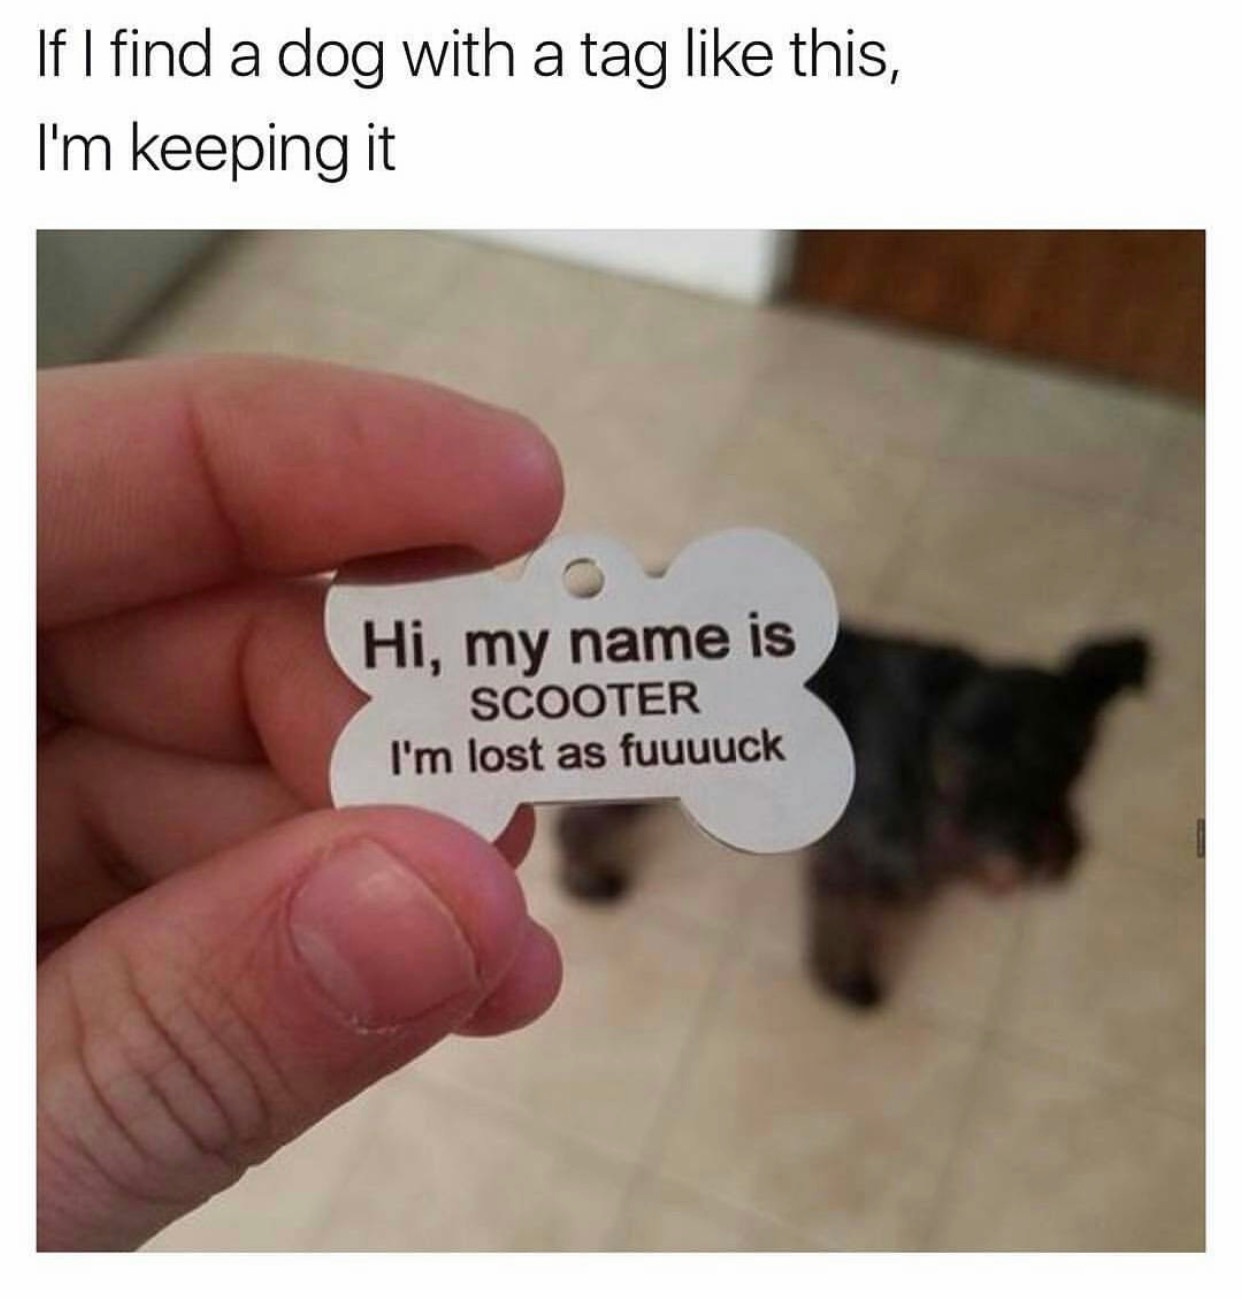 memes - i m lost as fuuuuck - If I find a dog with a tag this, I'm keeping it Hi, my name is Scooter I'm lost as fuuuuck